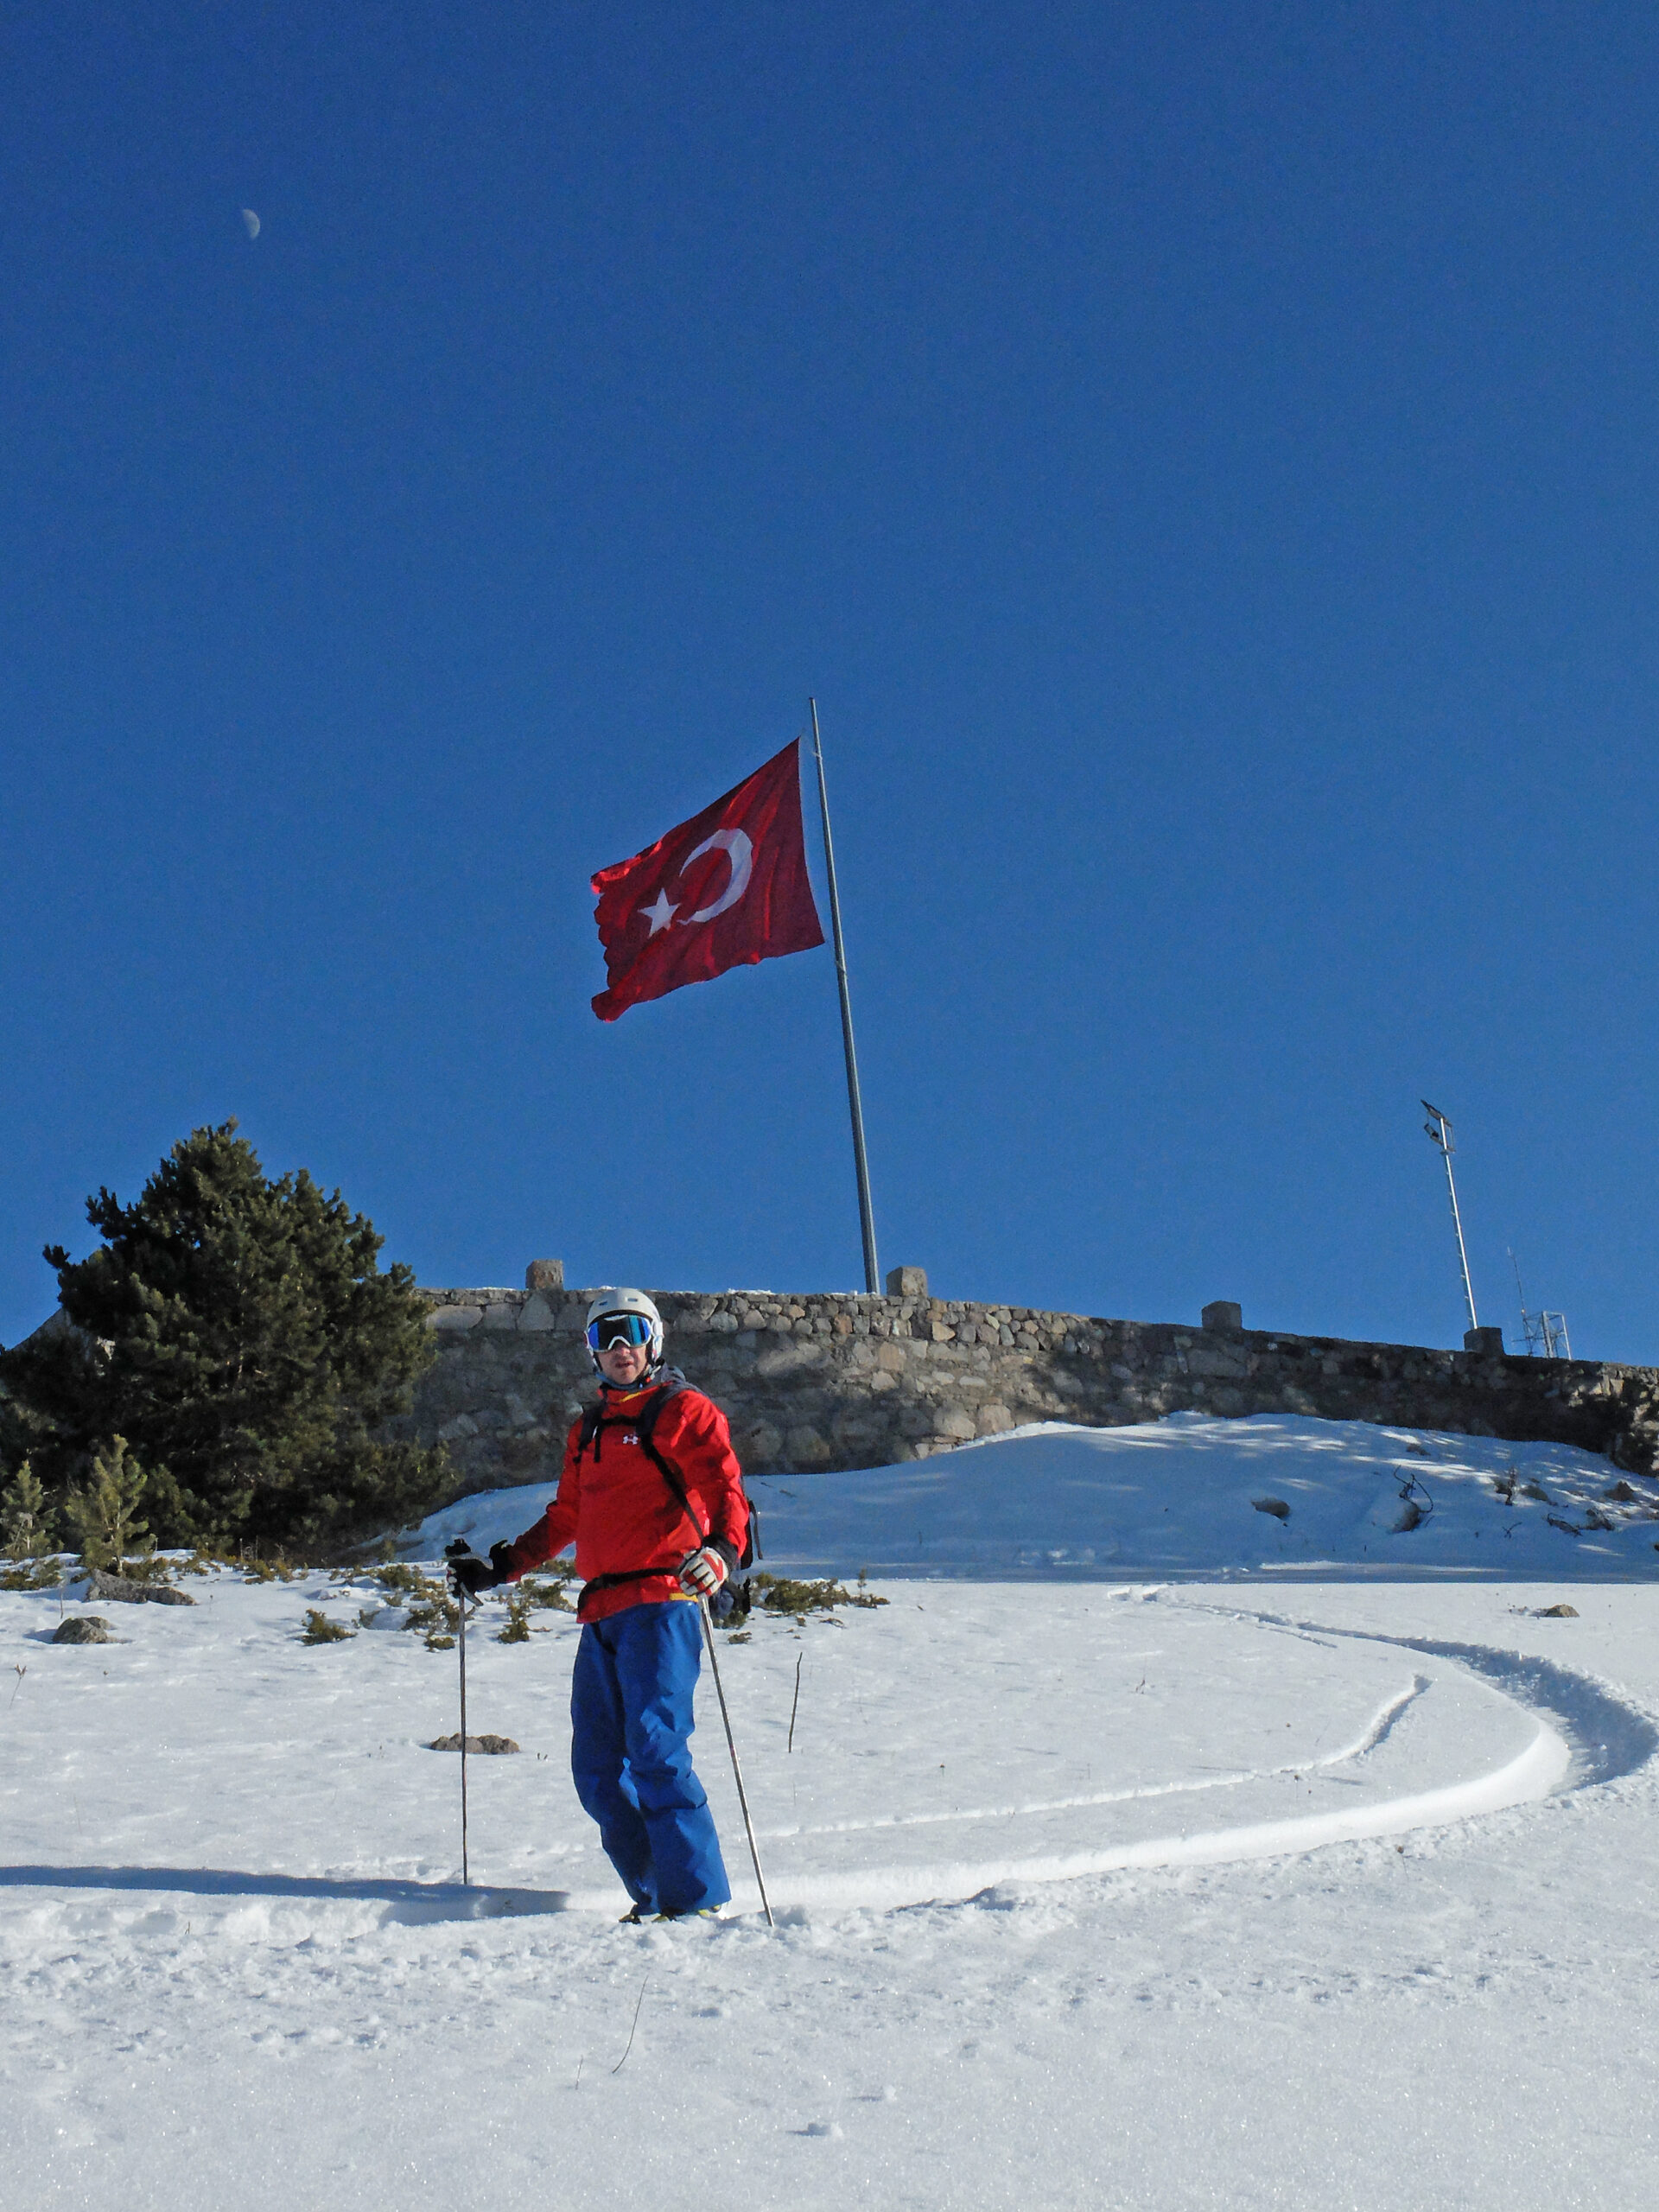 Skiing in Turkey with the flag